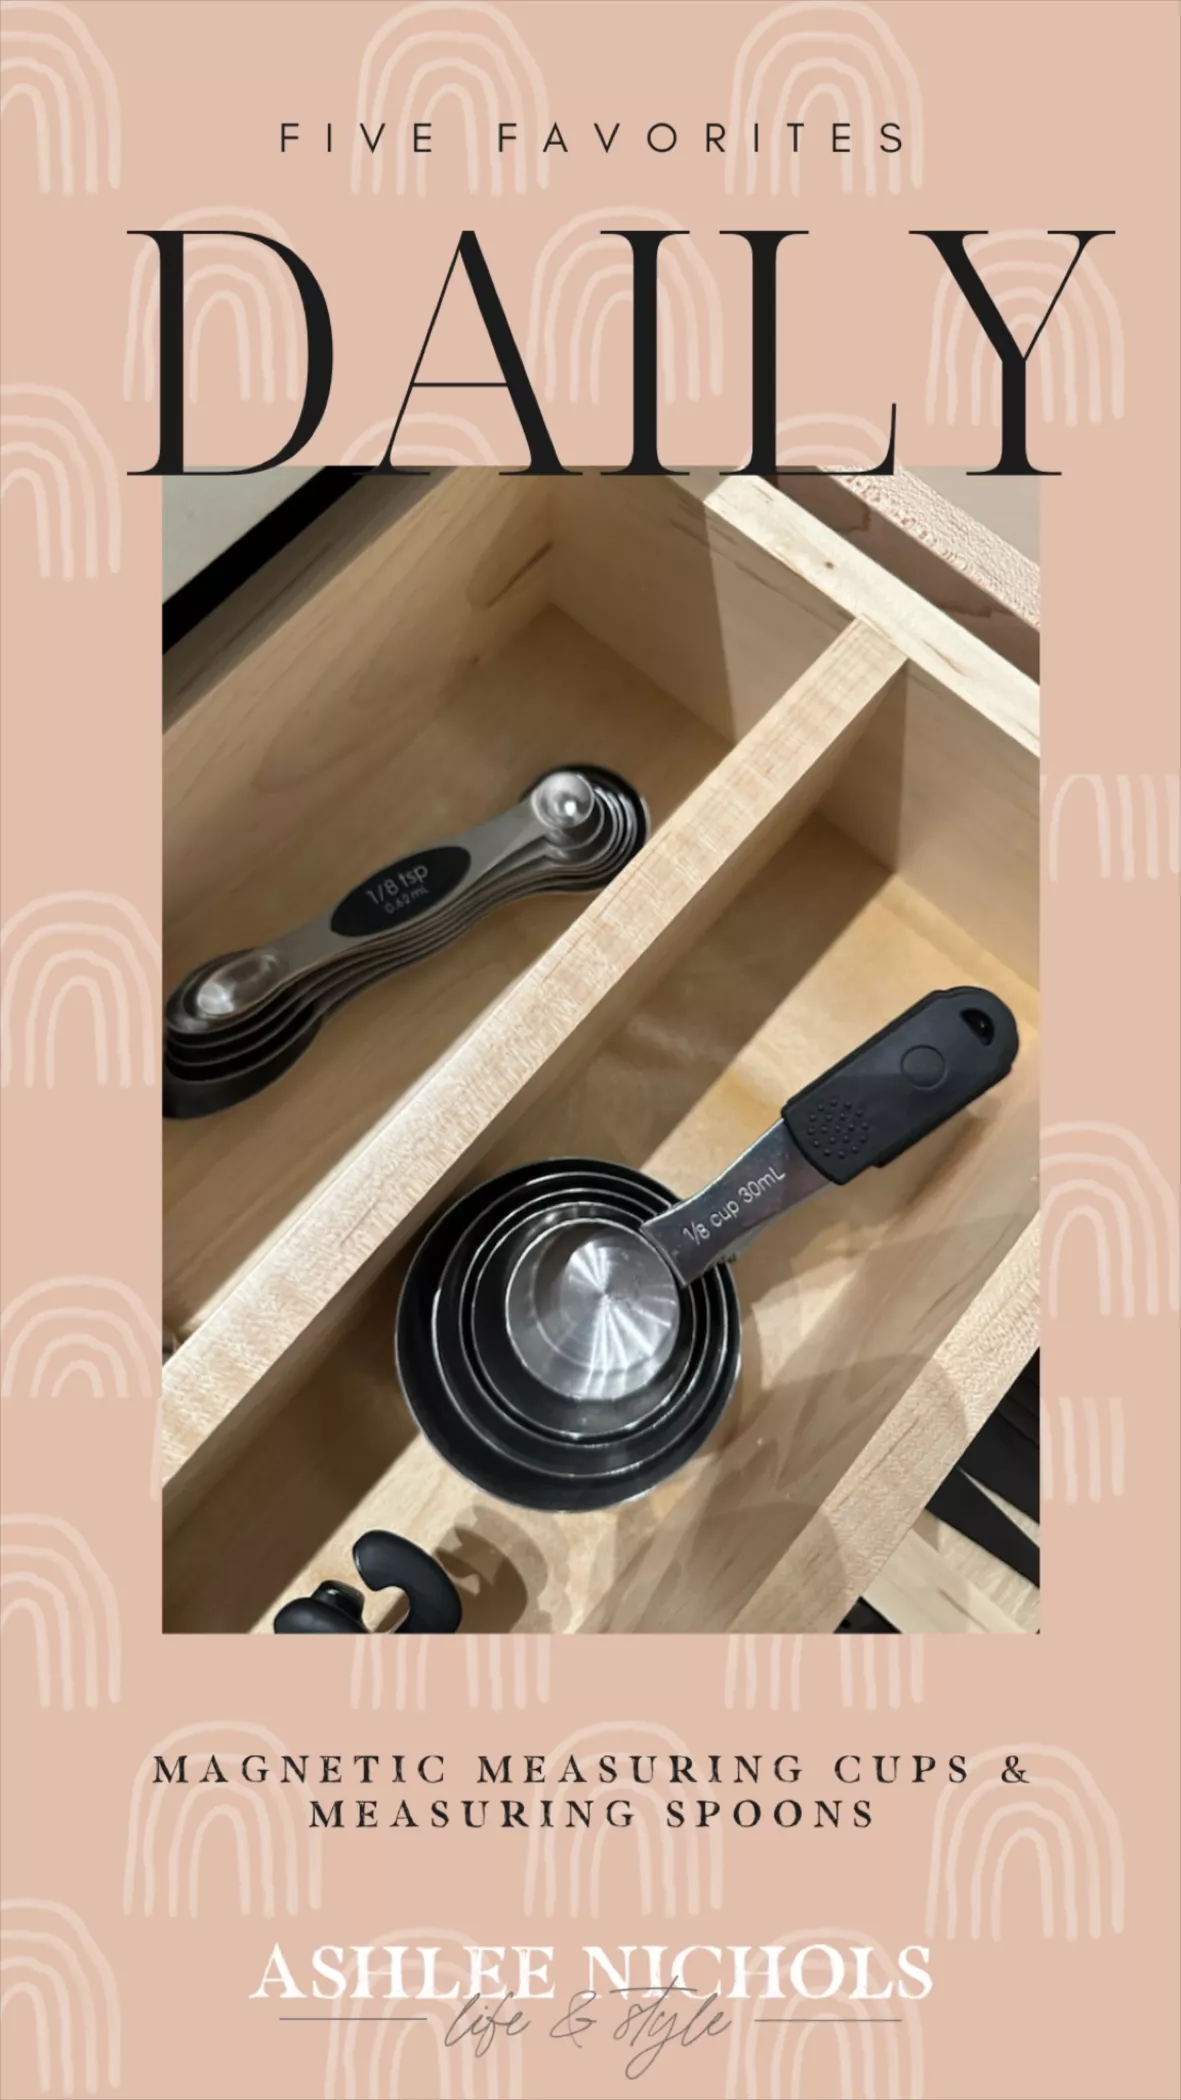 TILUCK Stainless Steel Measuring Cups & Spoons Set, Cups and